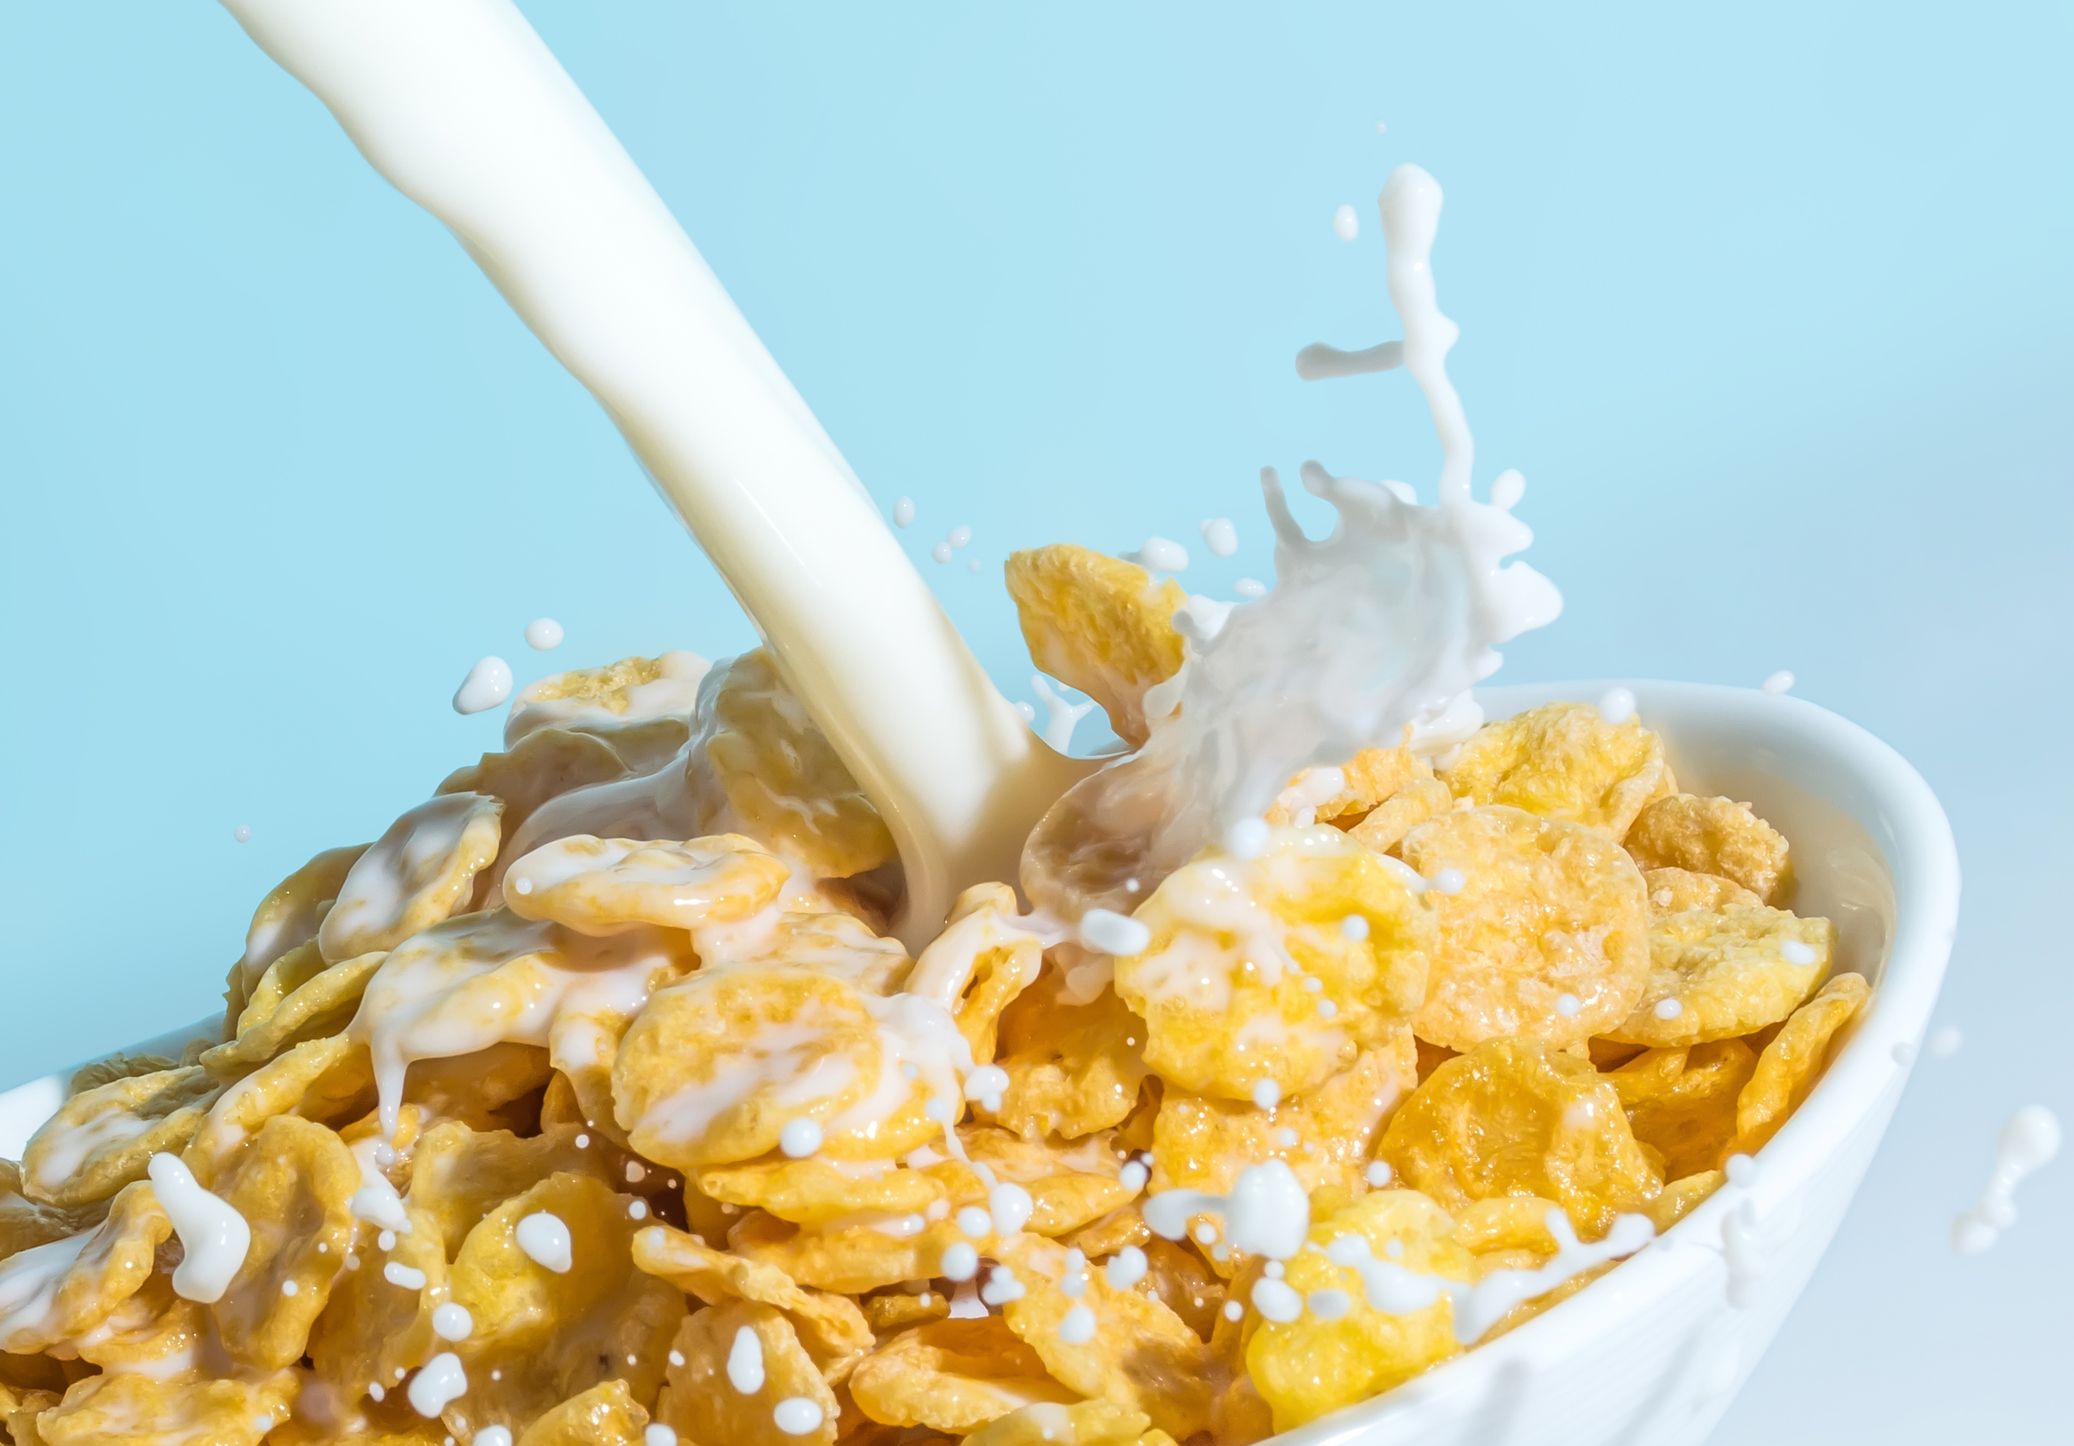 Breakfast Cereals Lose Potential Cancerfighting Compounds During Food